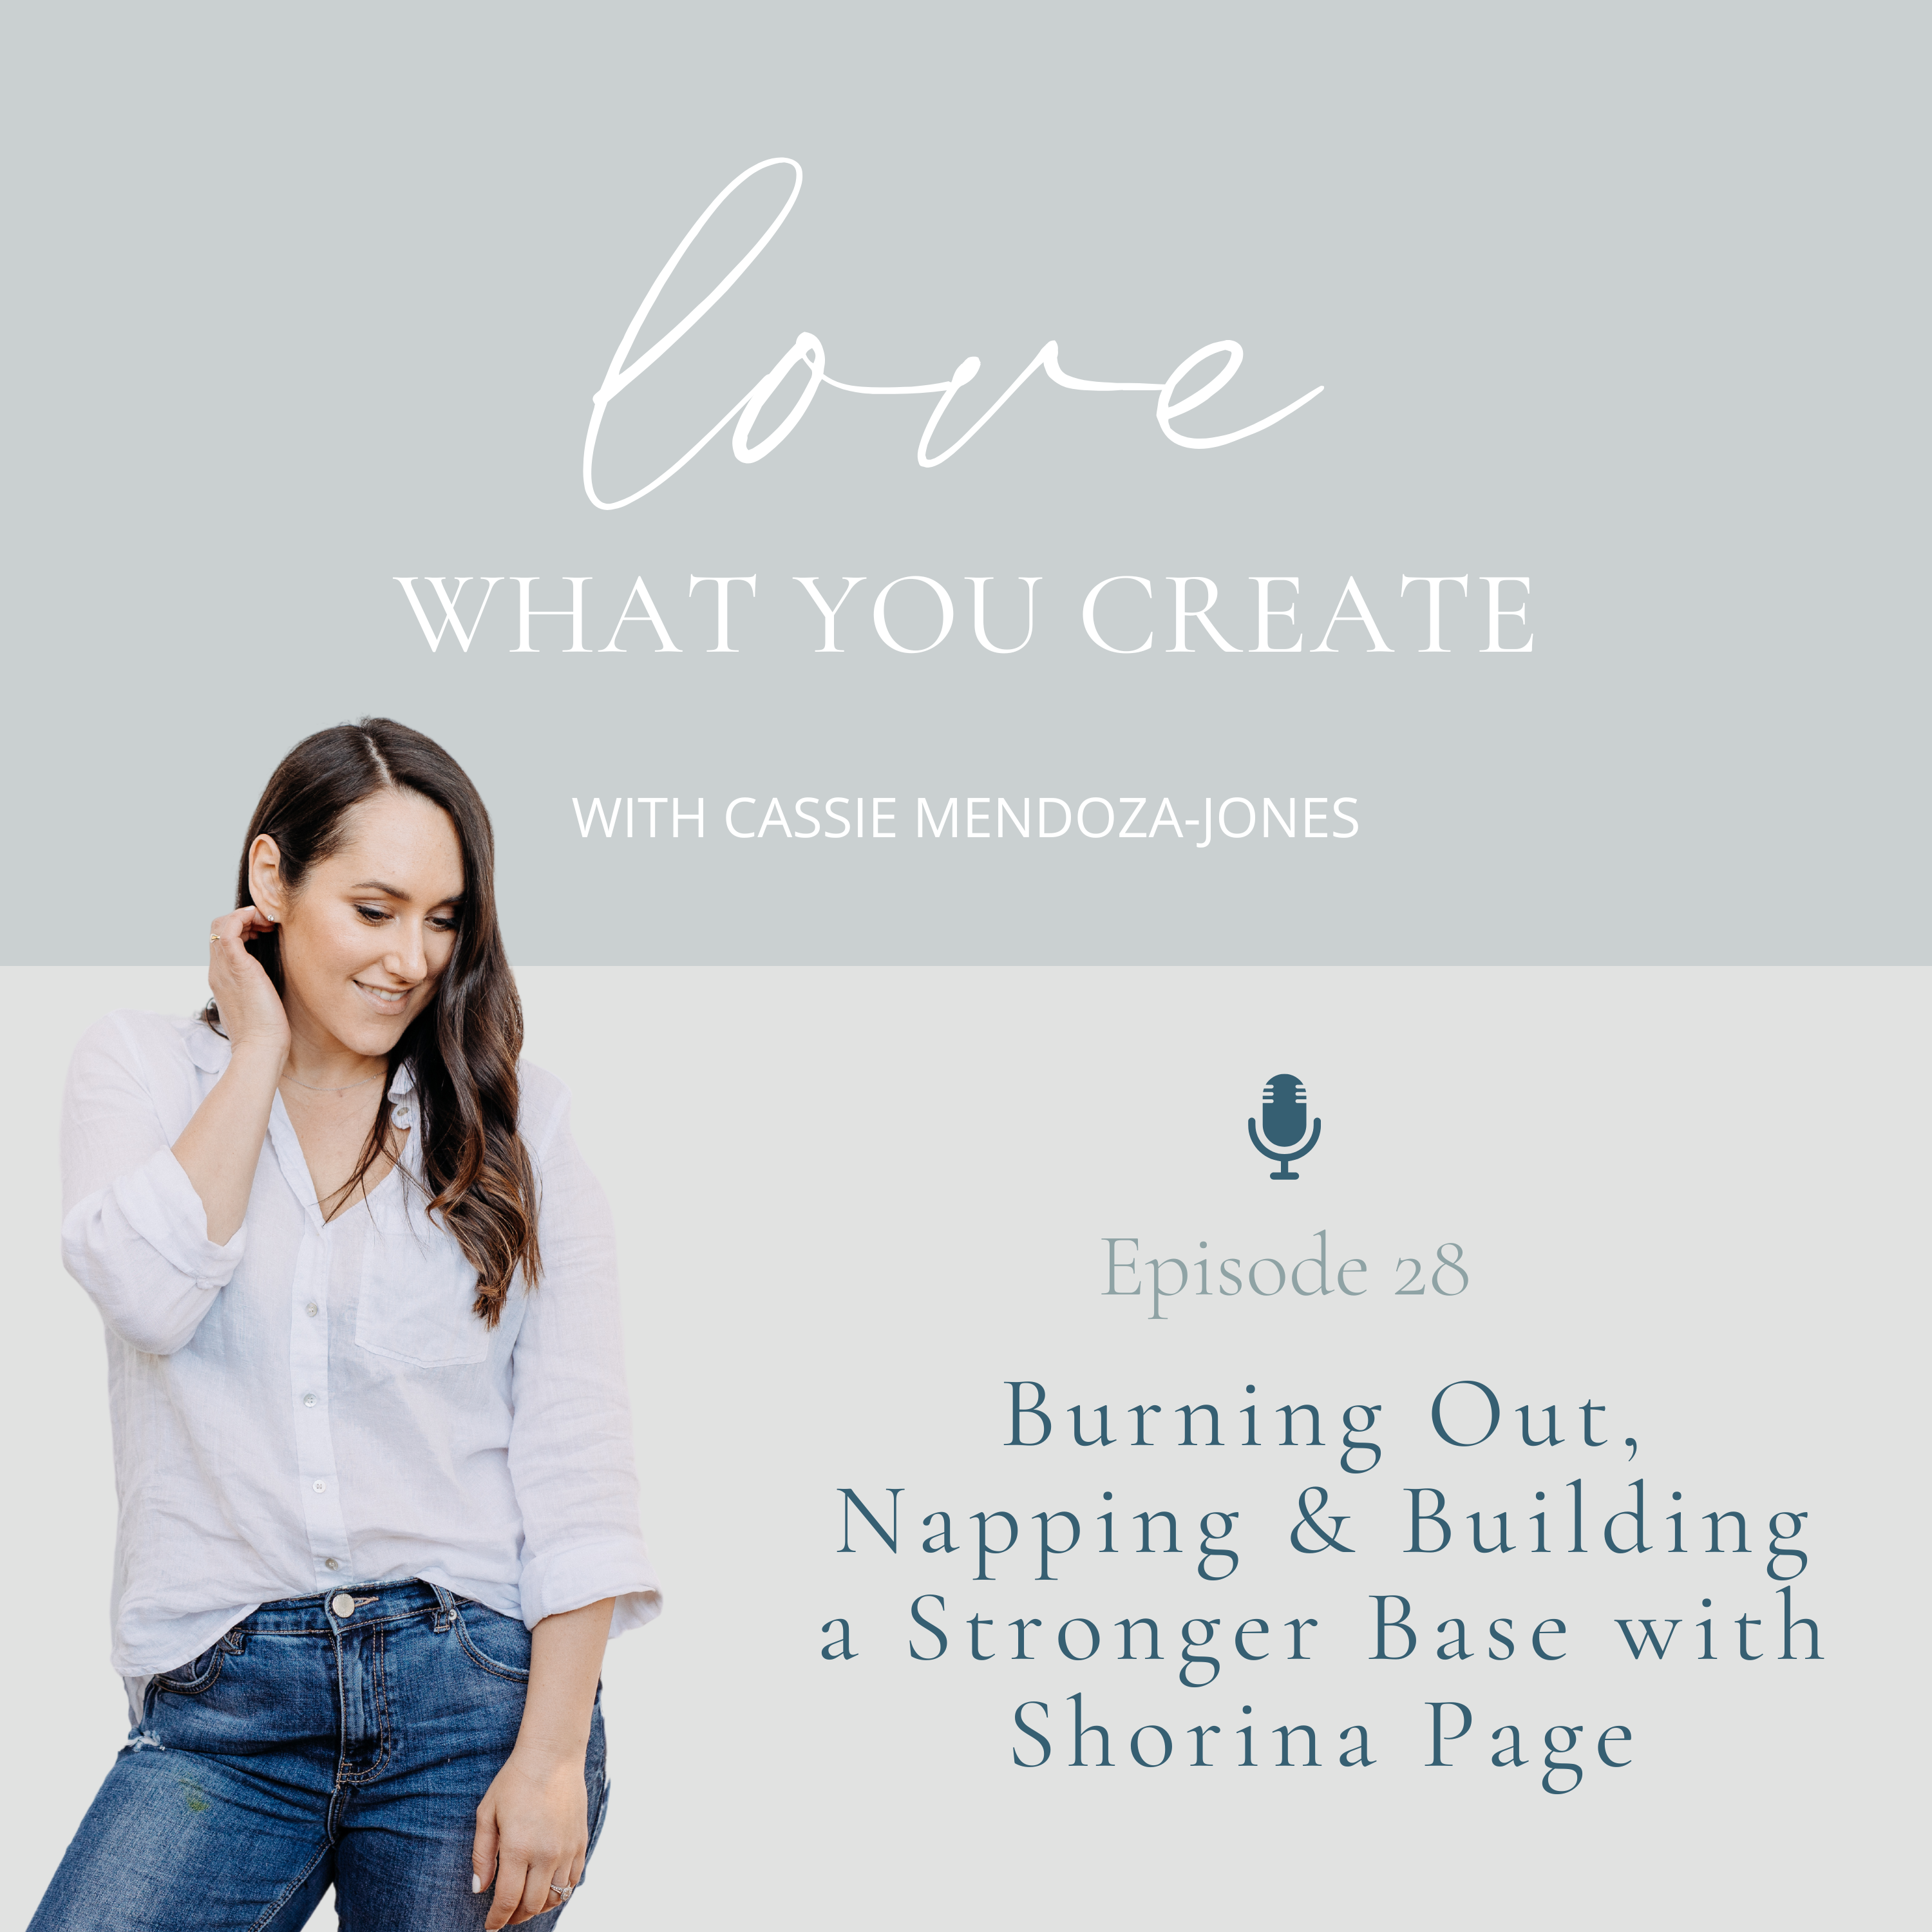 Ep 28. Burning out, napping & building a stronger base with Shorina Page